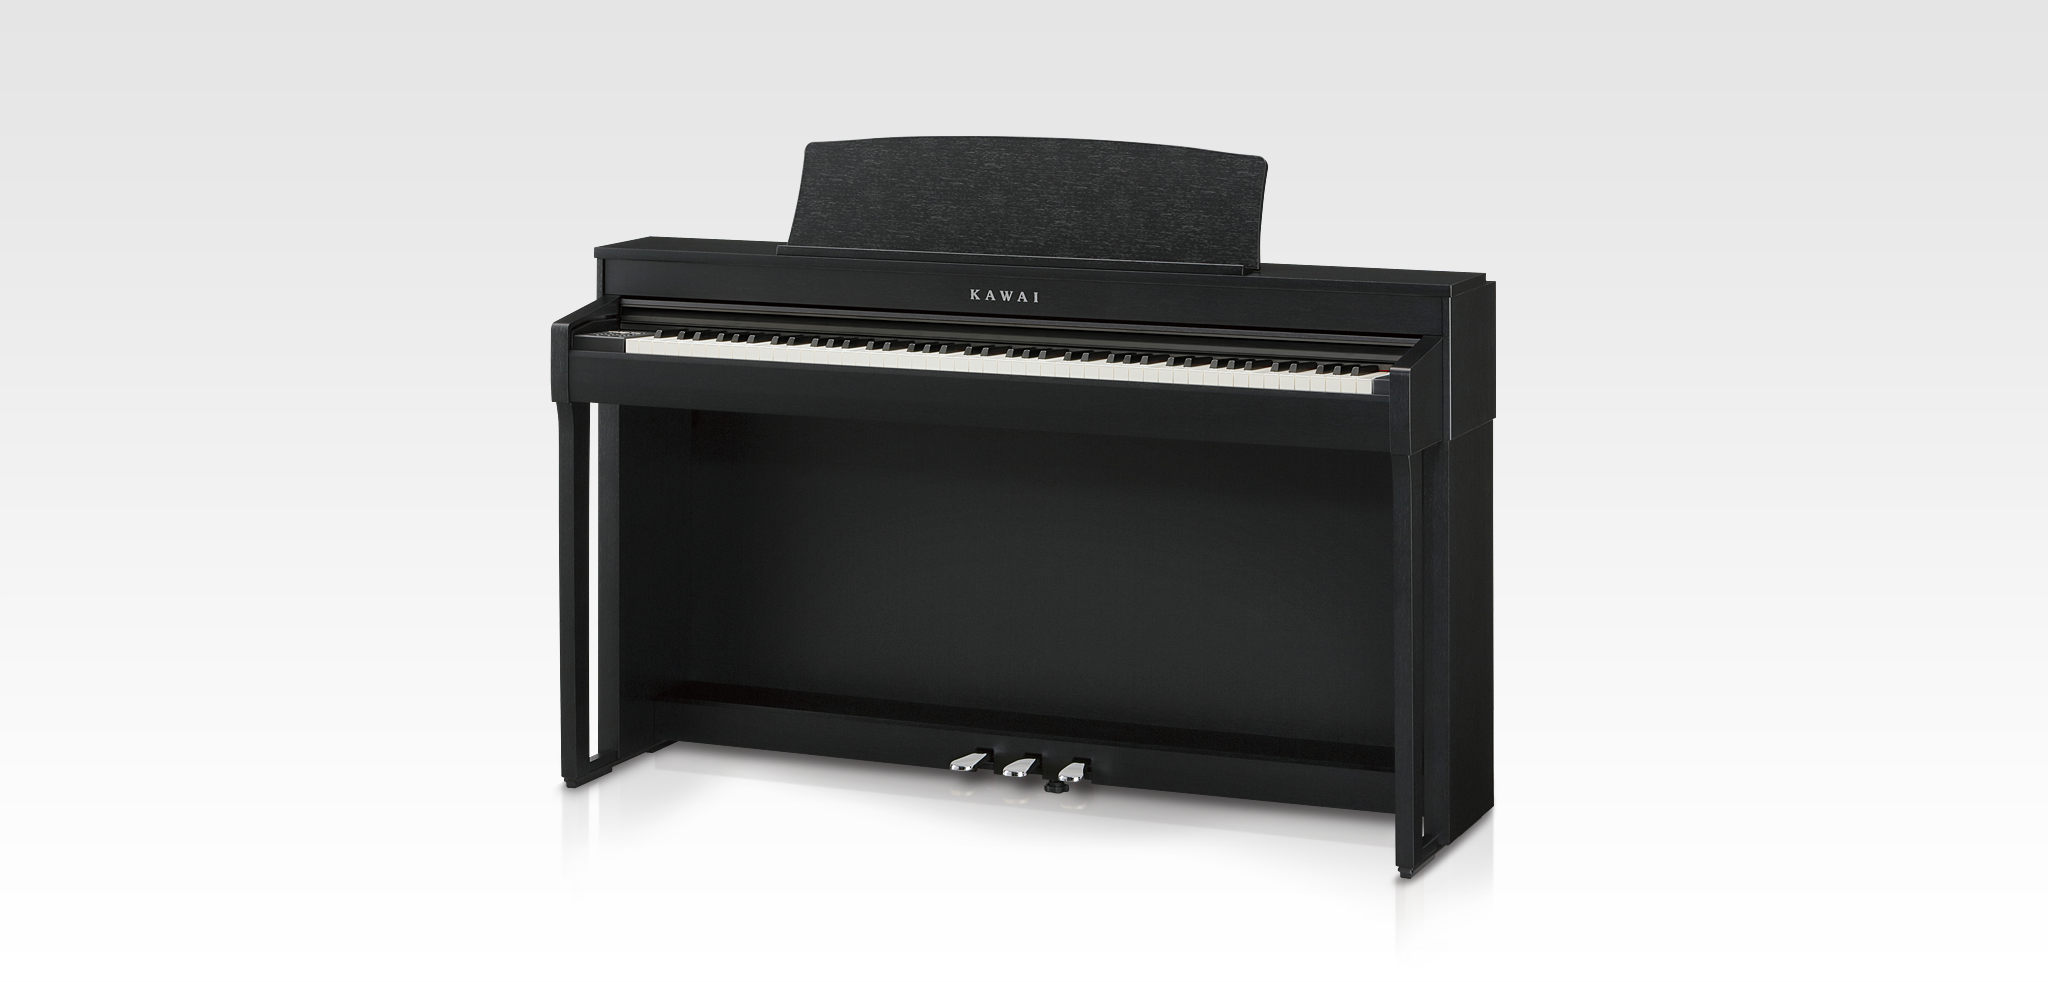 water the flower bring the action salon Kawai CN39｜Digital Pianos｜Products｜Kawai Musical Instruments Manufacturing  Co., Ltd.